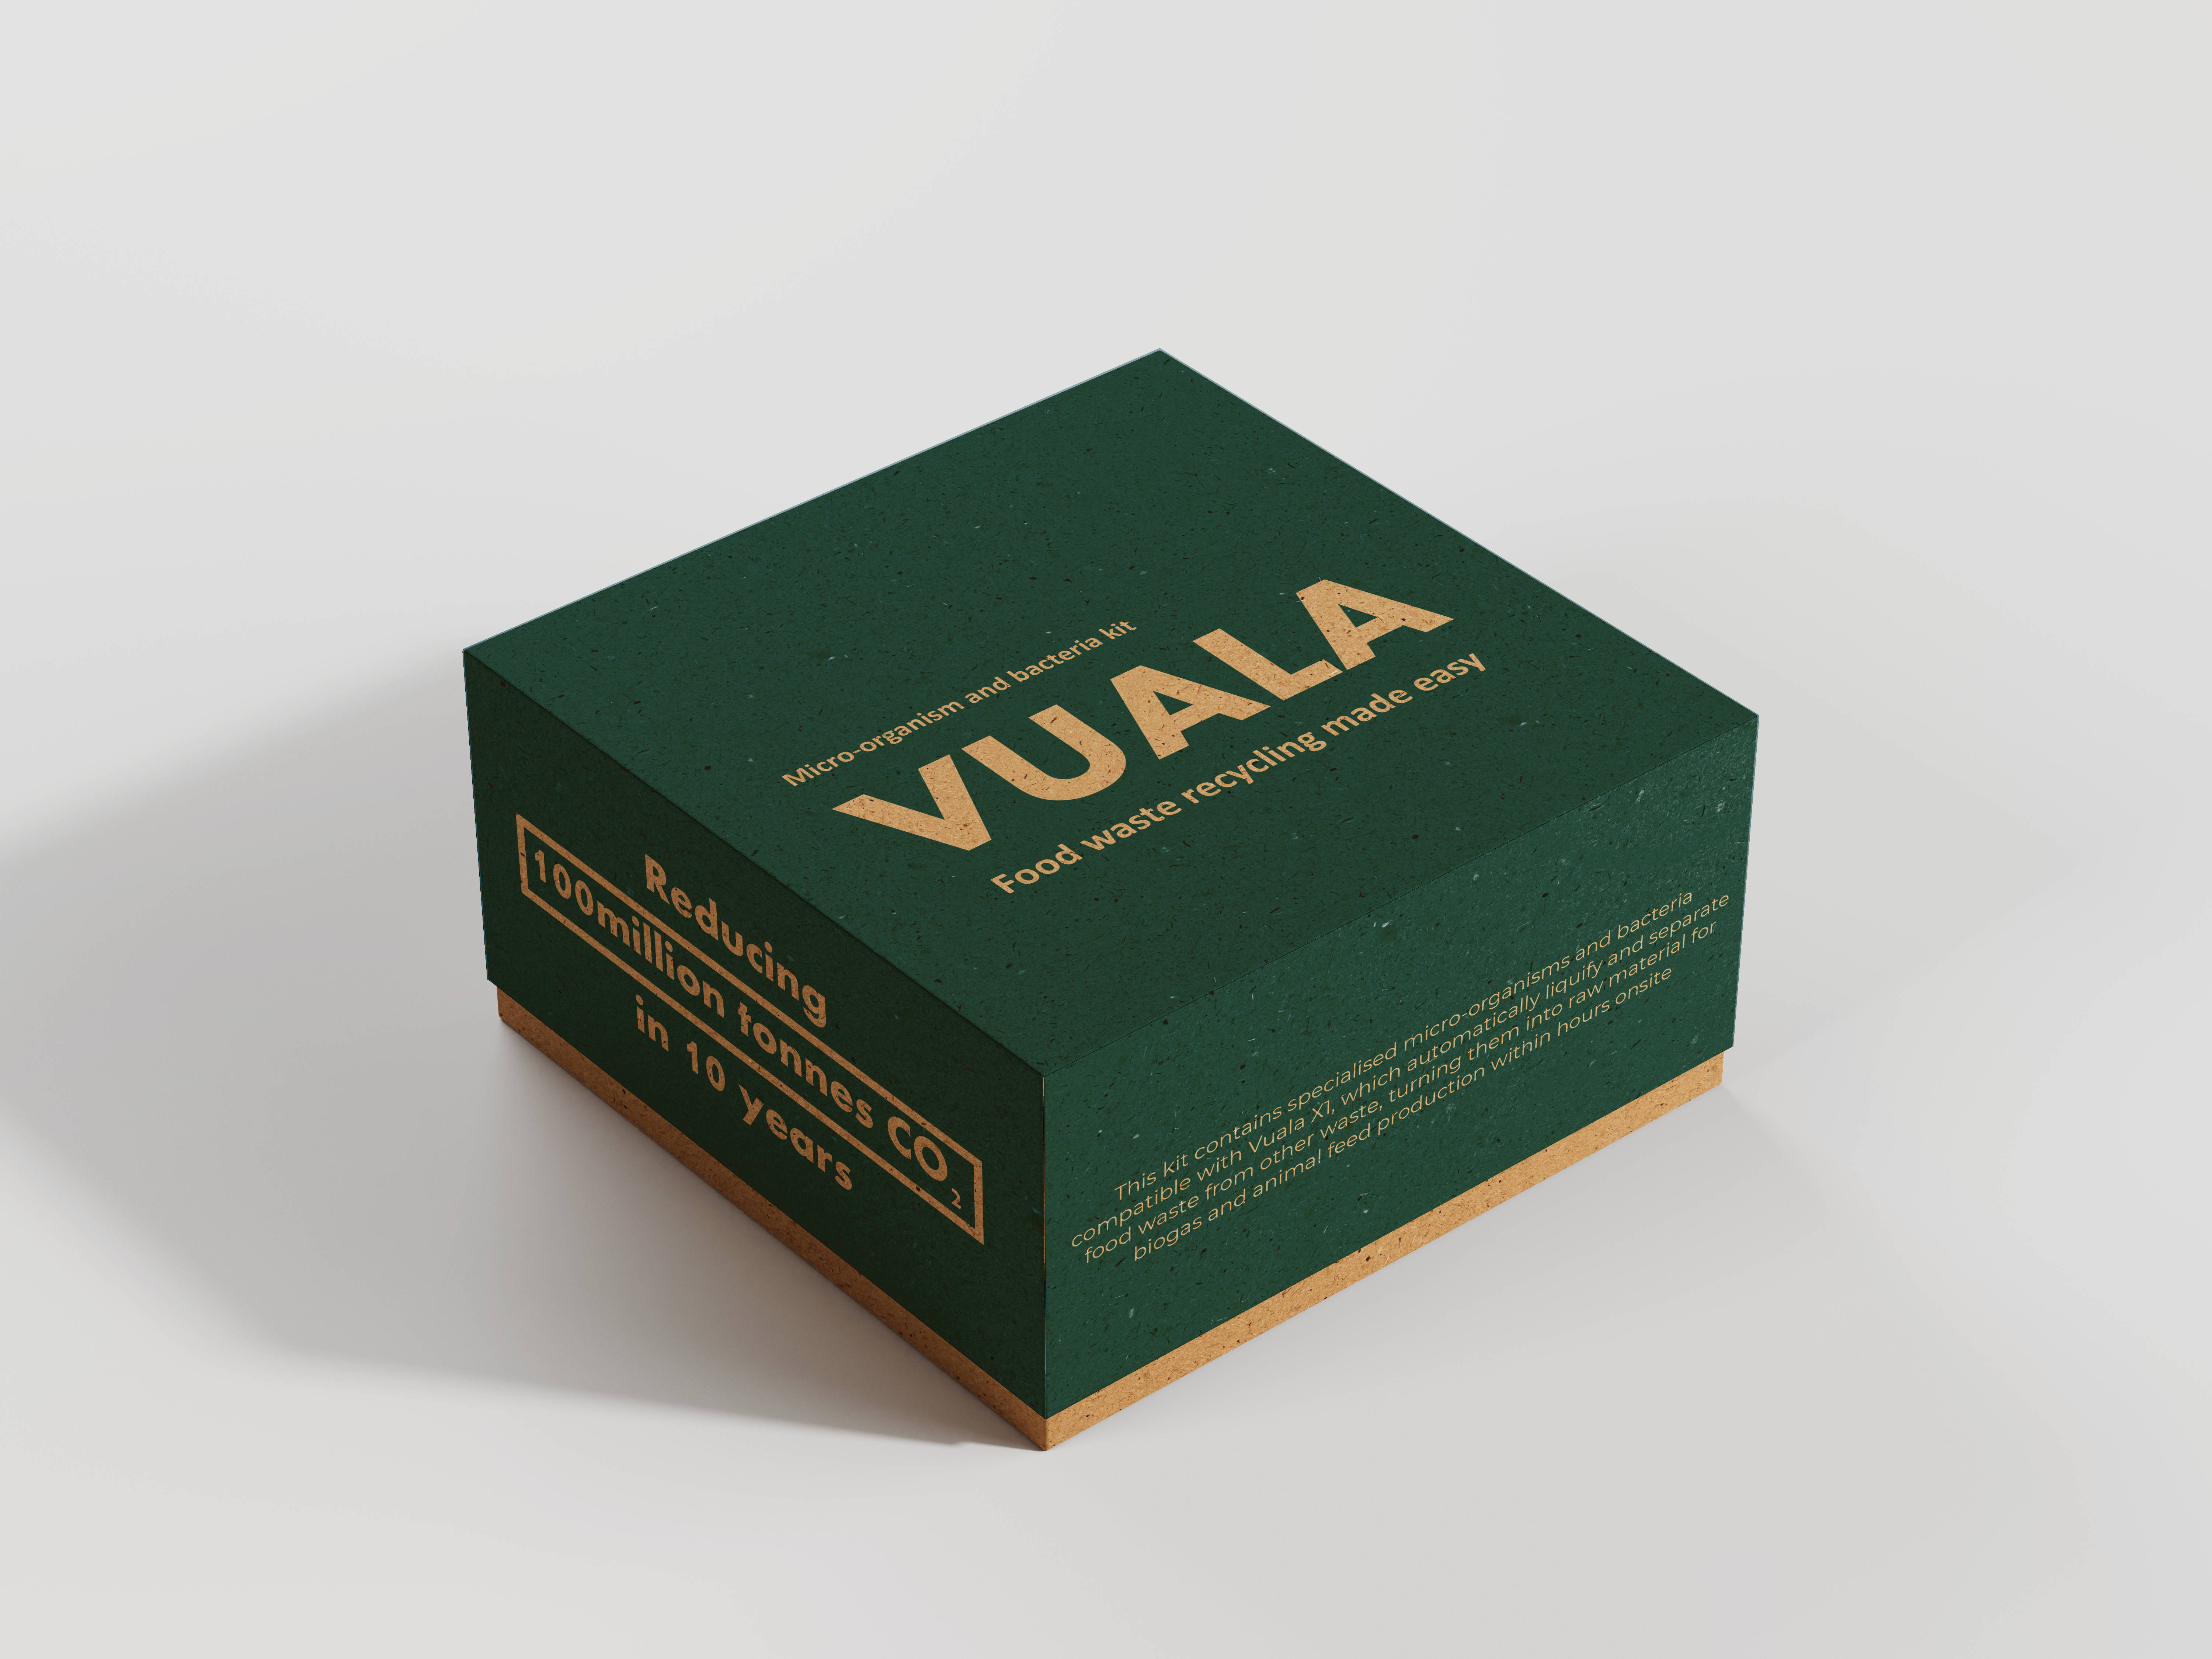 A box with Vuala's logo on the cover